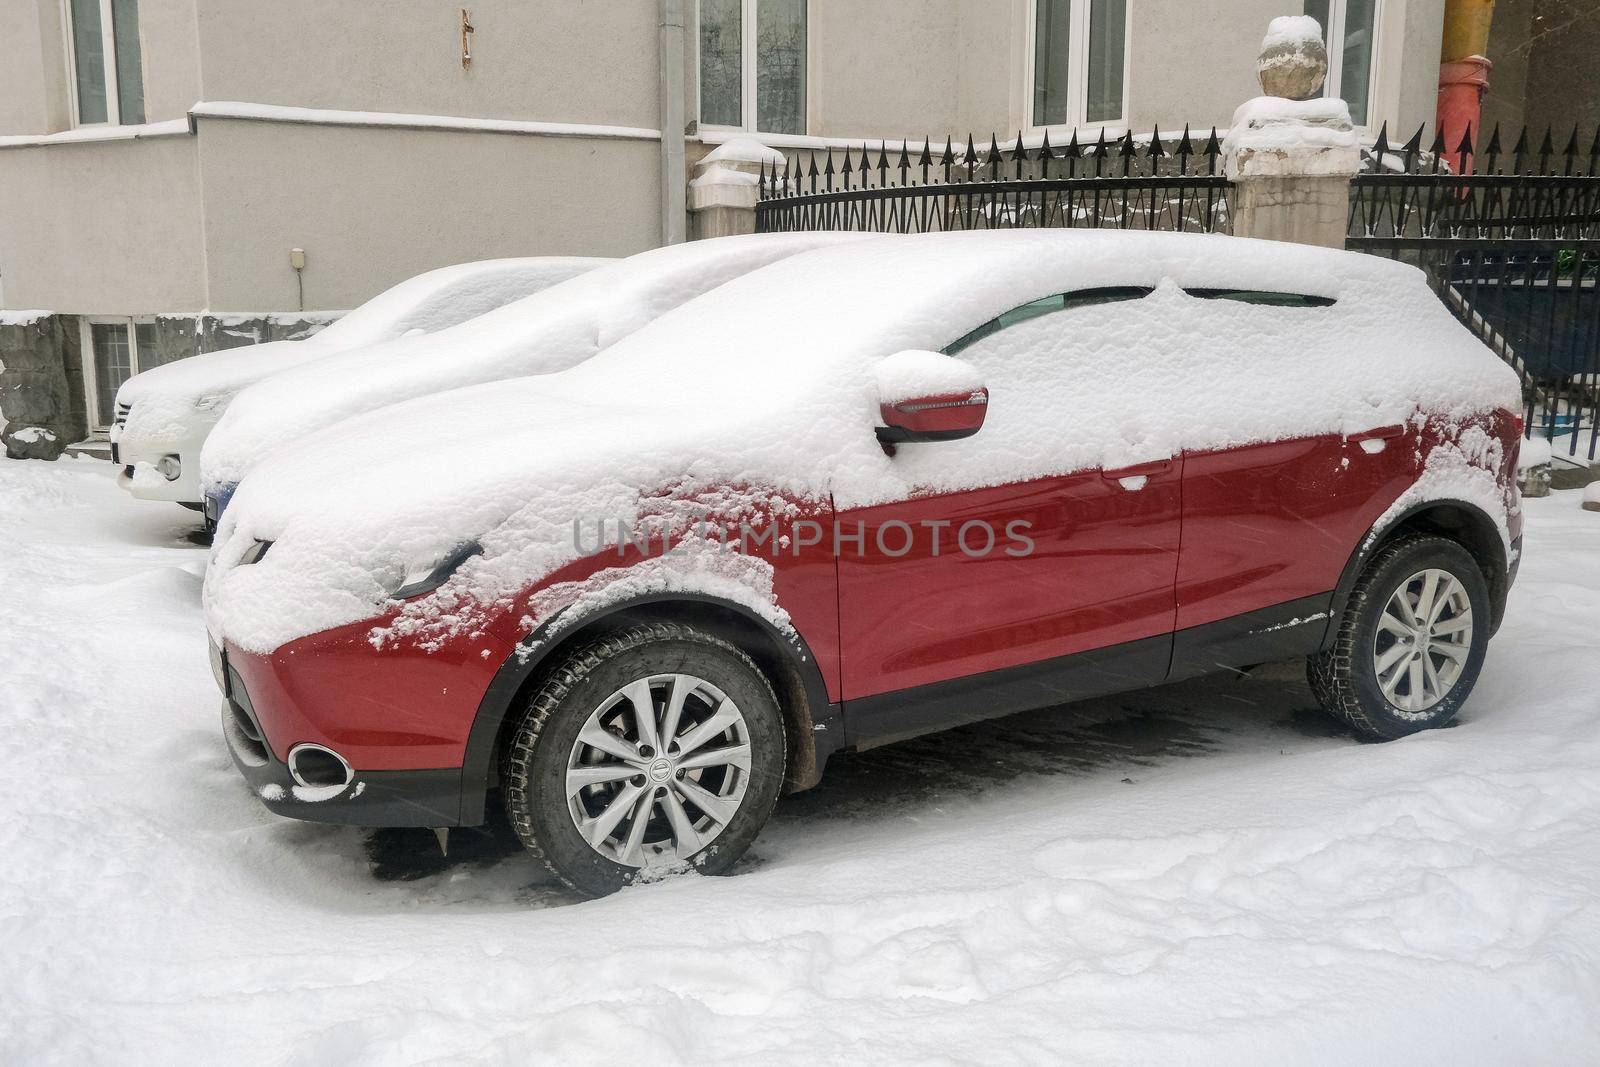 Cars covered with snow parked on street by Demkat